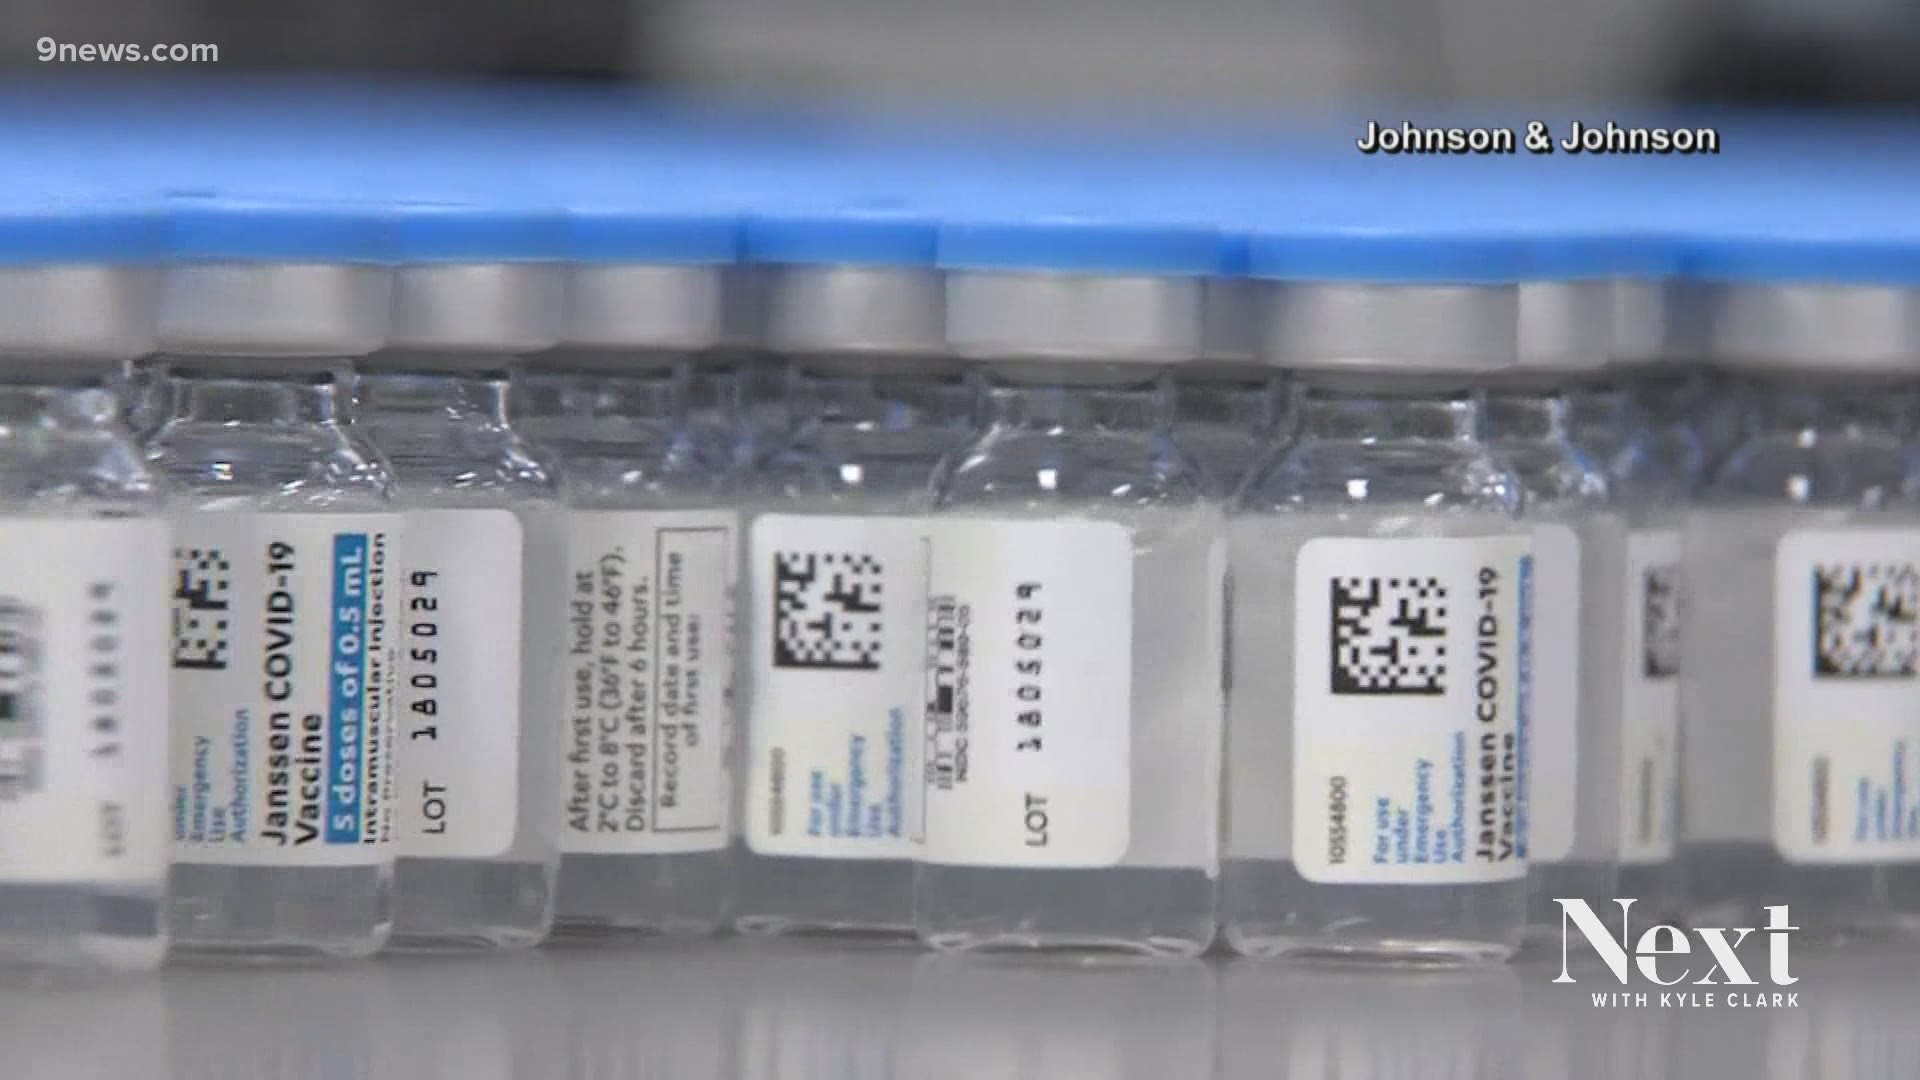 Of the 6.8 million people who've received the Johnson & Johnson vaccine, six people had a rare blood clot issue. We looked at Colorado's response and public trust.